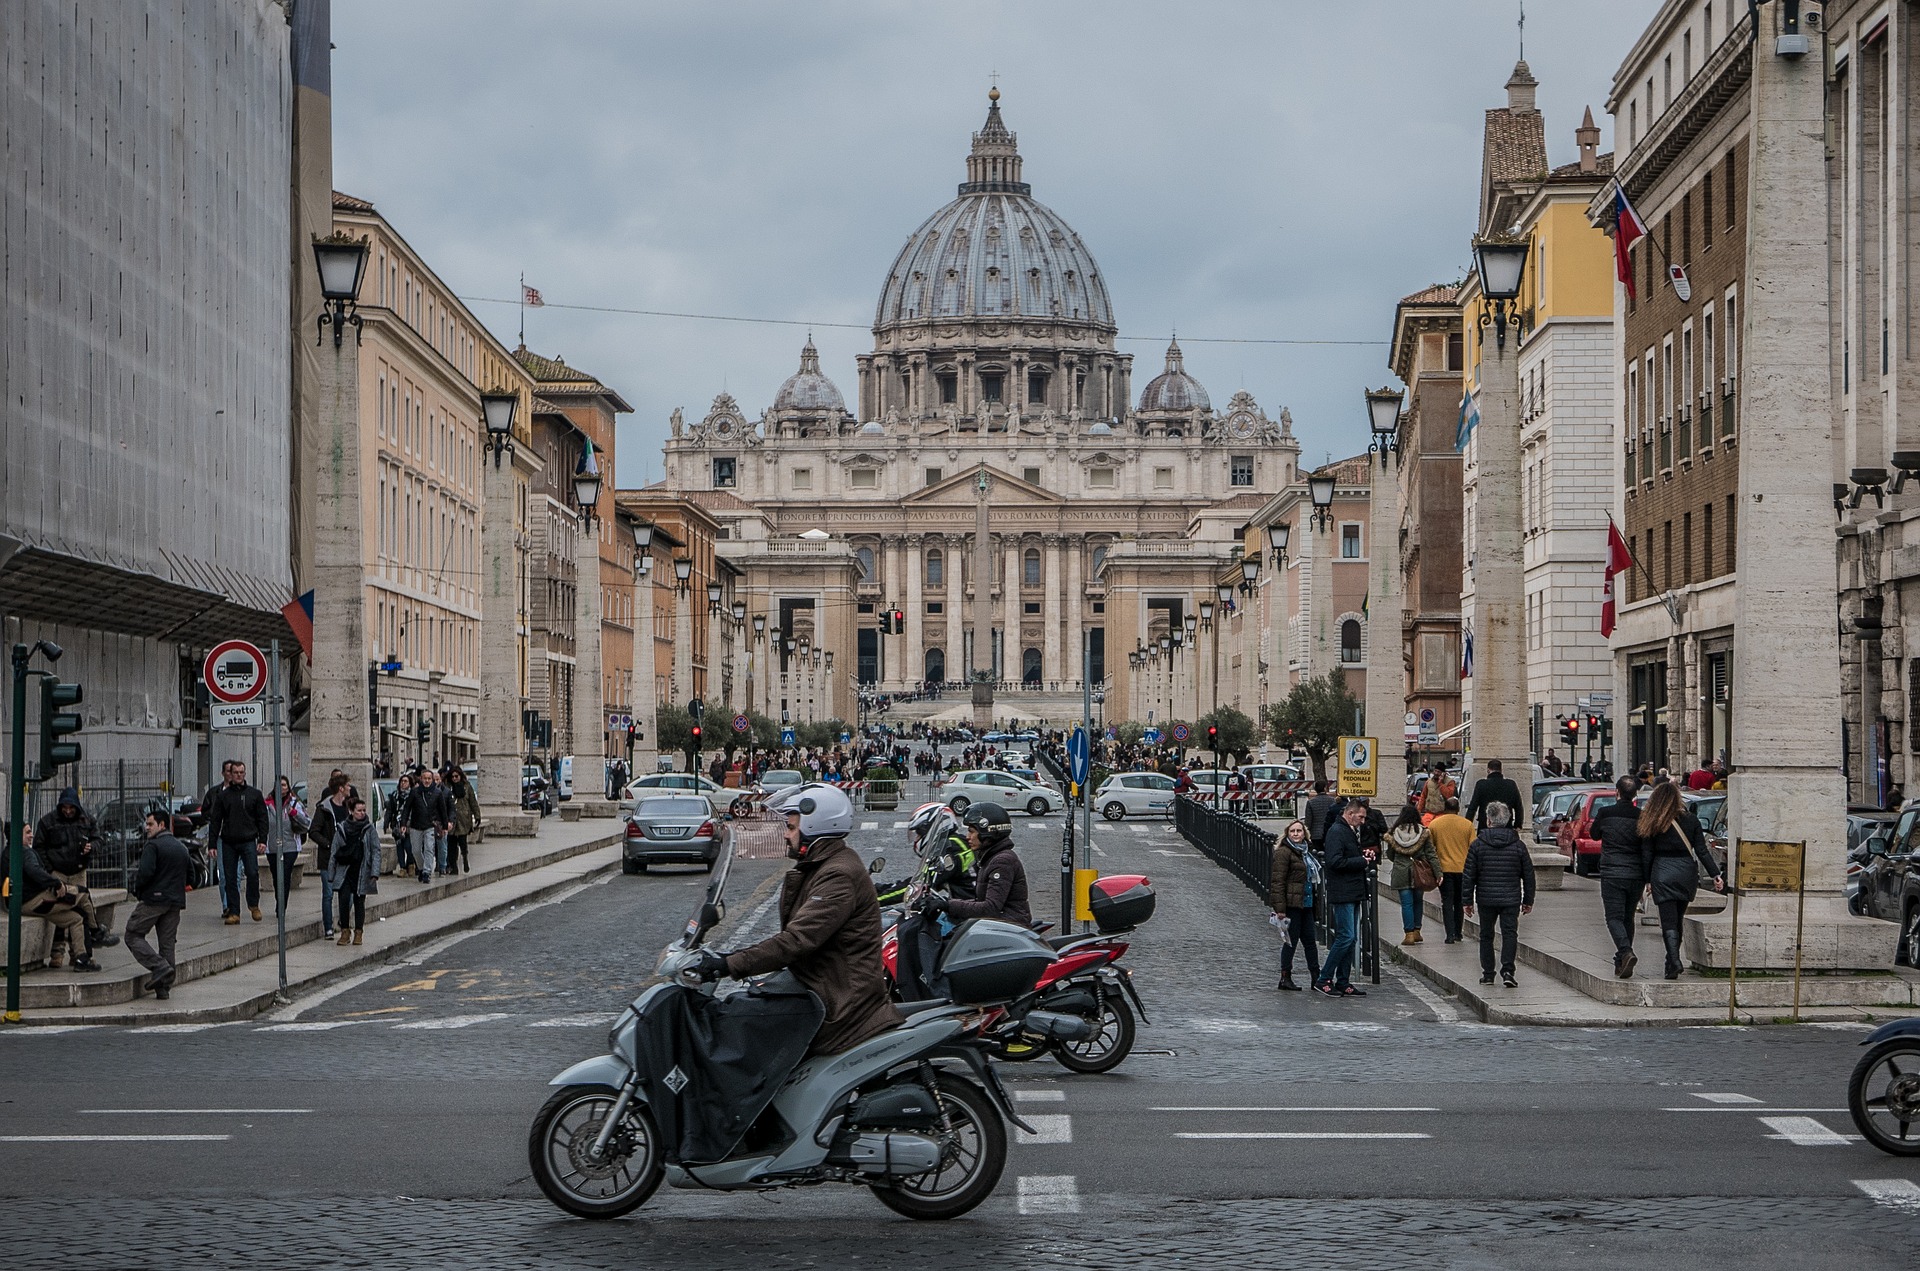 Scooters outside St. Peter’s Basilica, Rome